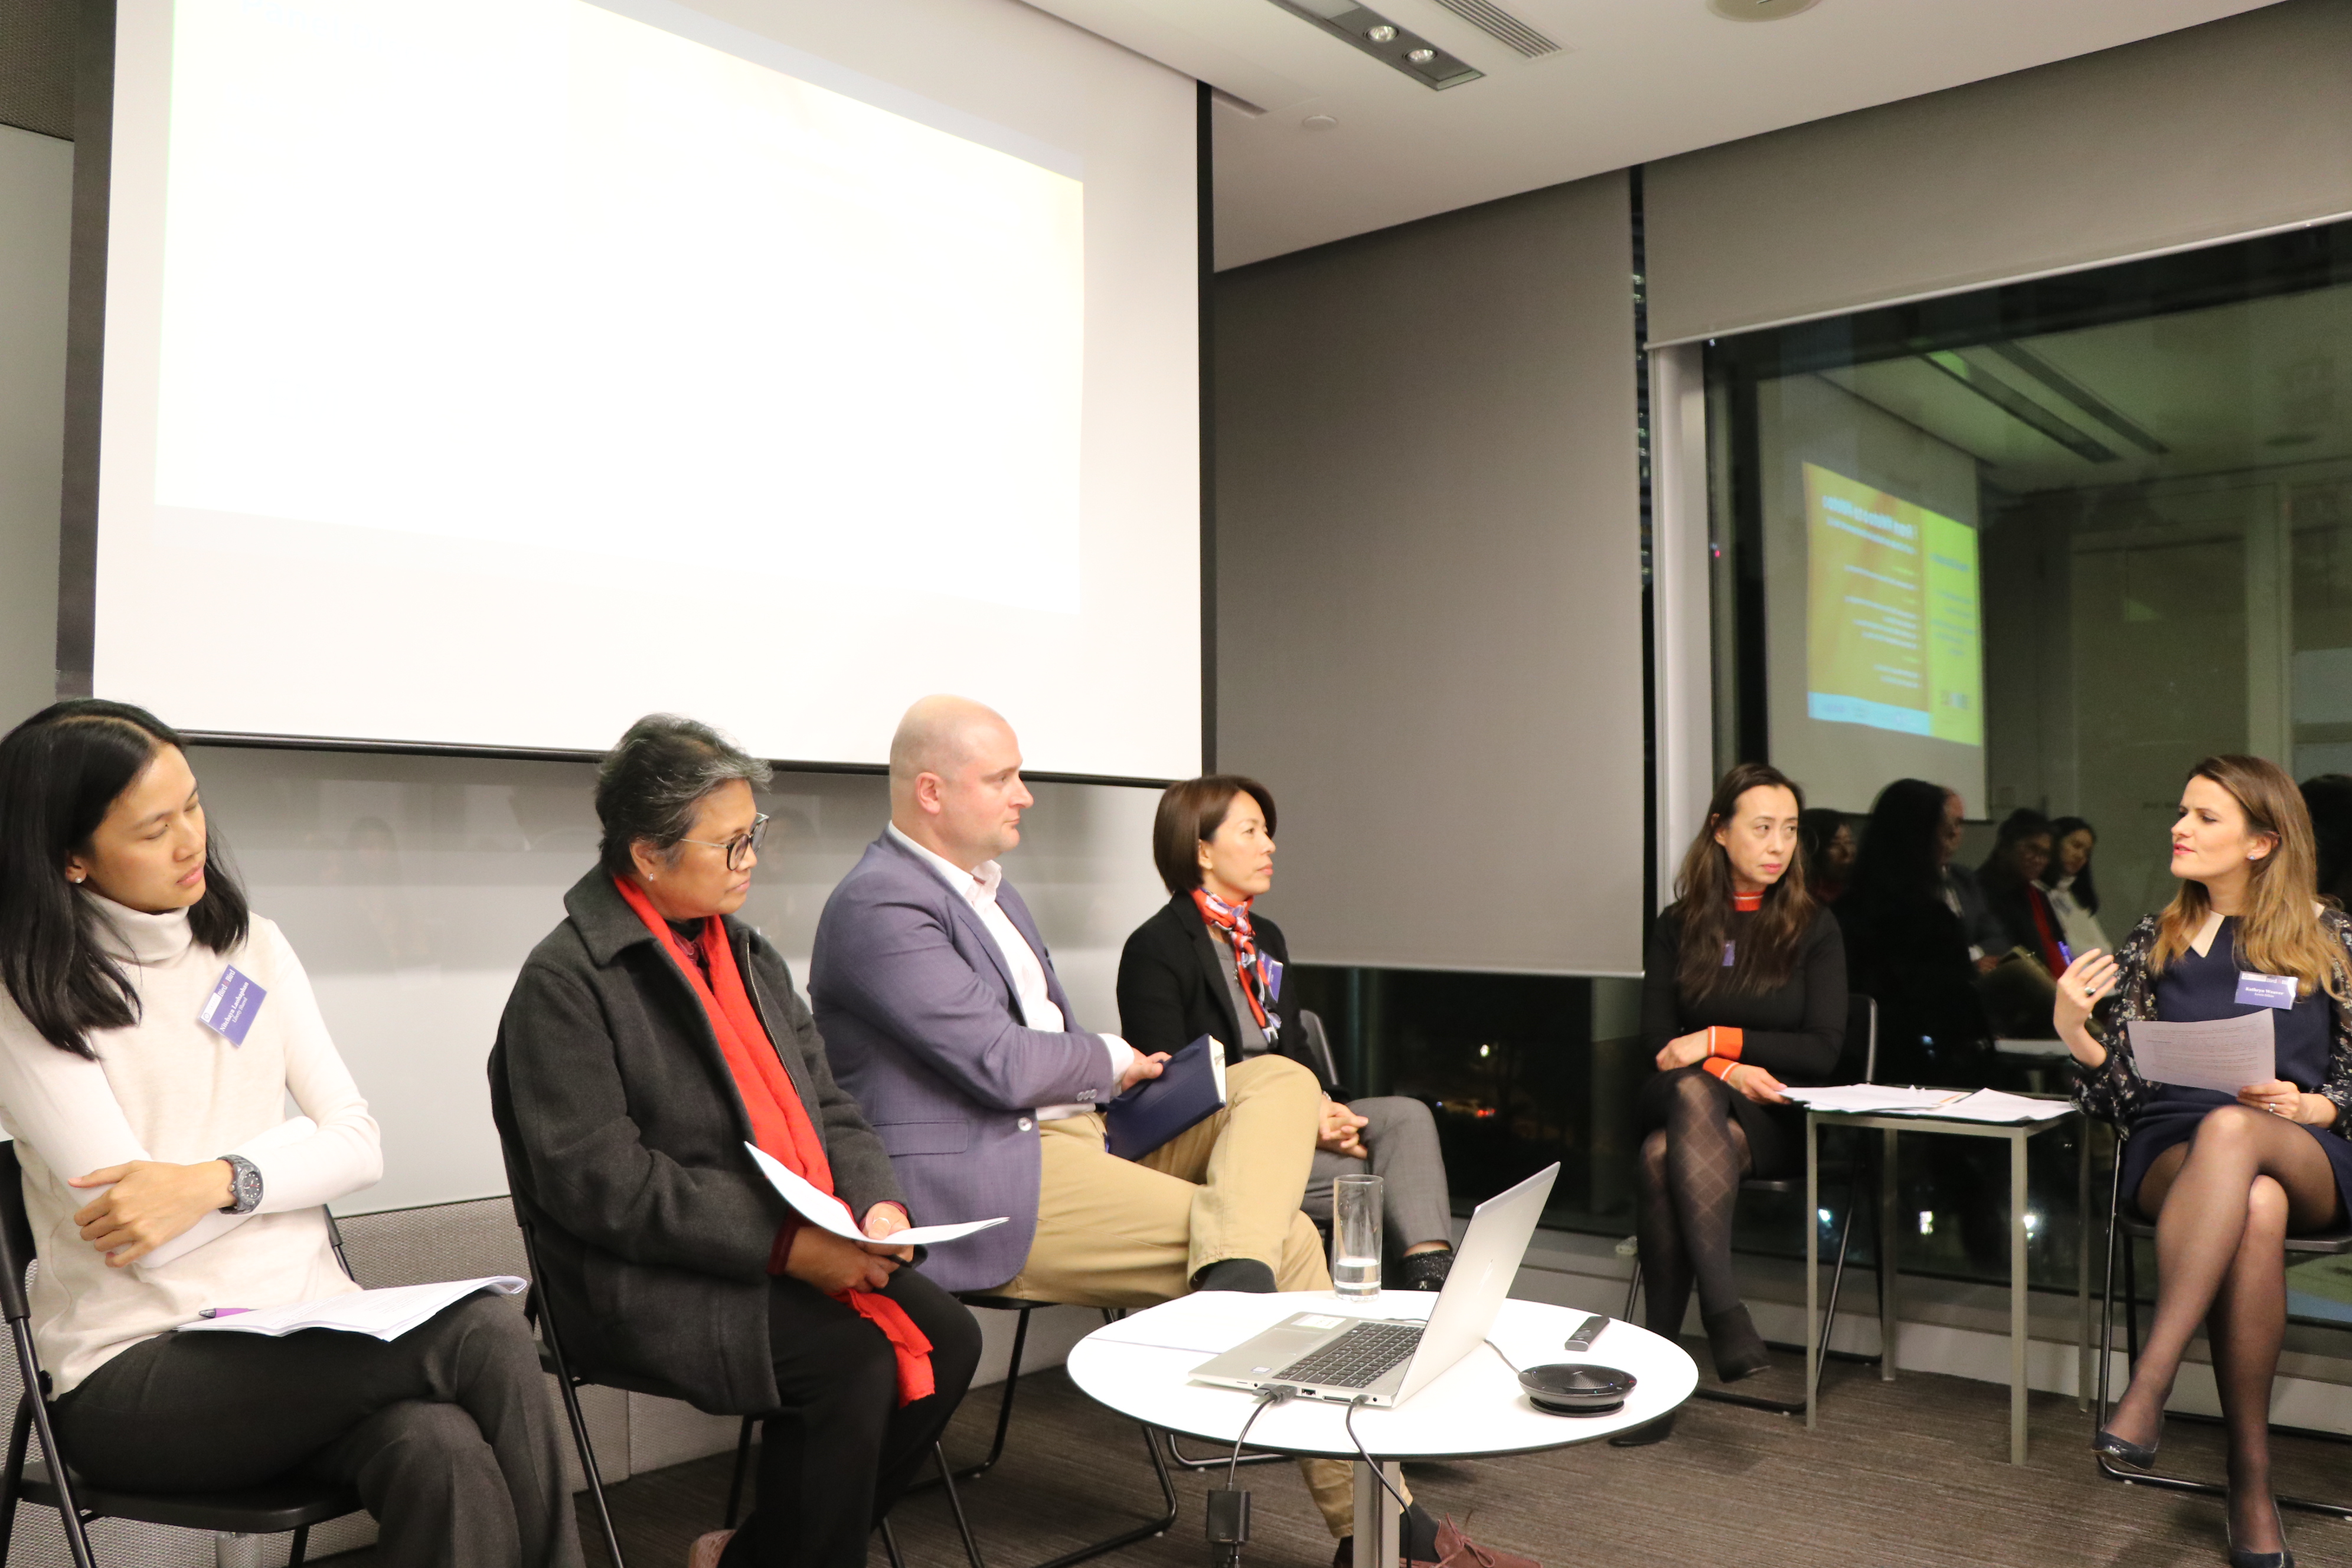 Ms Nitchaya Laohaphan from Liberty Shared, Ms Cynthia Tellez from Mission for Migrant Workers, Mr Adrian Warr from Edelman and Prof. Susanne Choi from CUHK. Moderators: Ms Diana Purdy from Bird & Bird and Ms Kathryn Weaver from Lewis Silkin